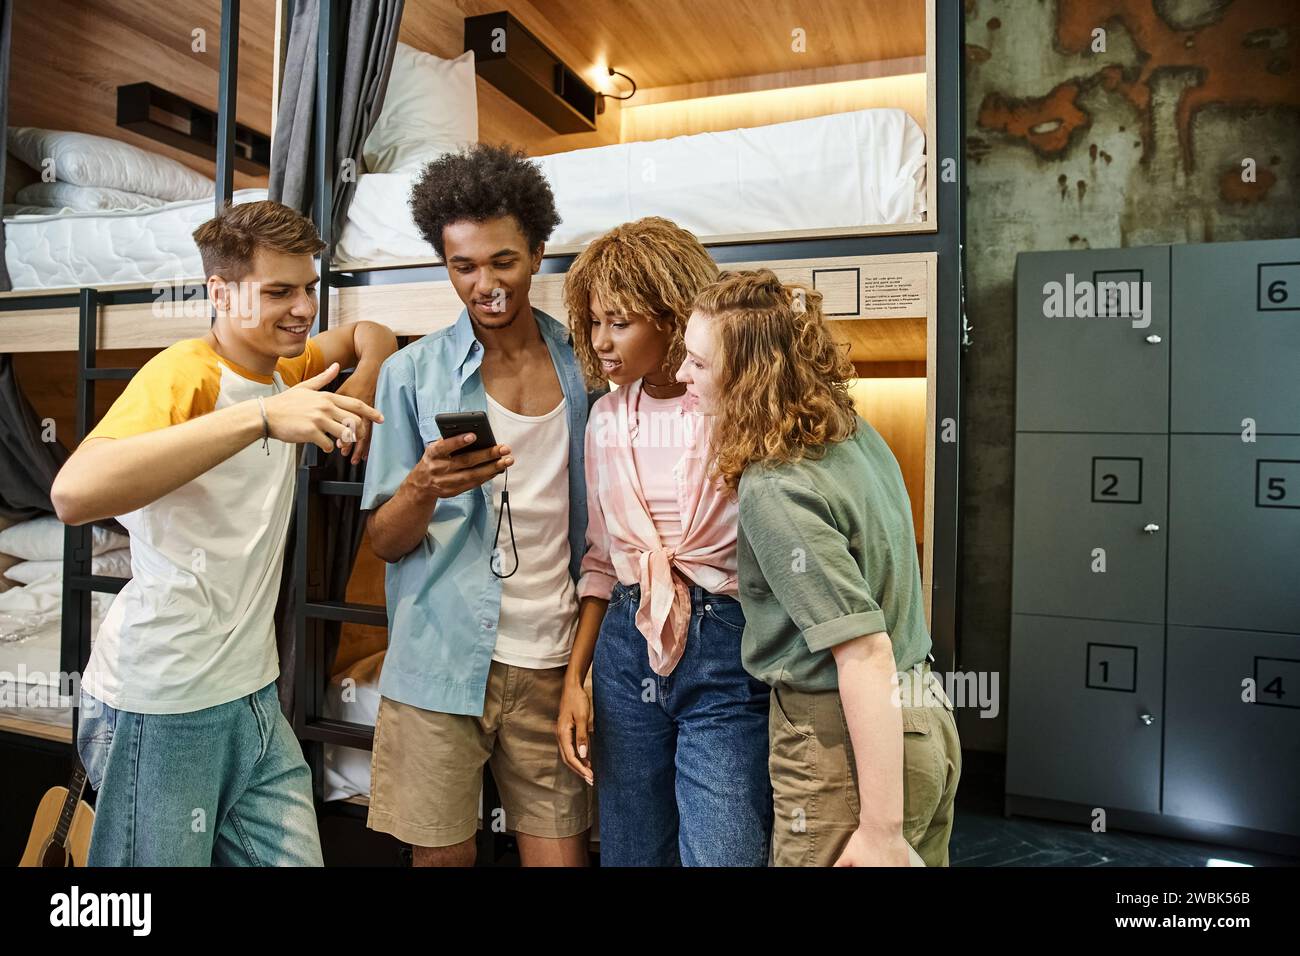 happy african american student using mobile phone near multiethnic friends in youth hostel Stock Photo